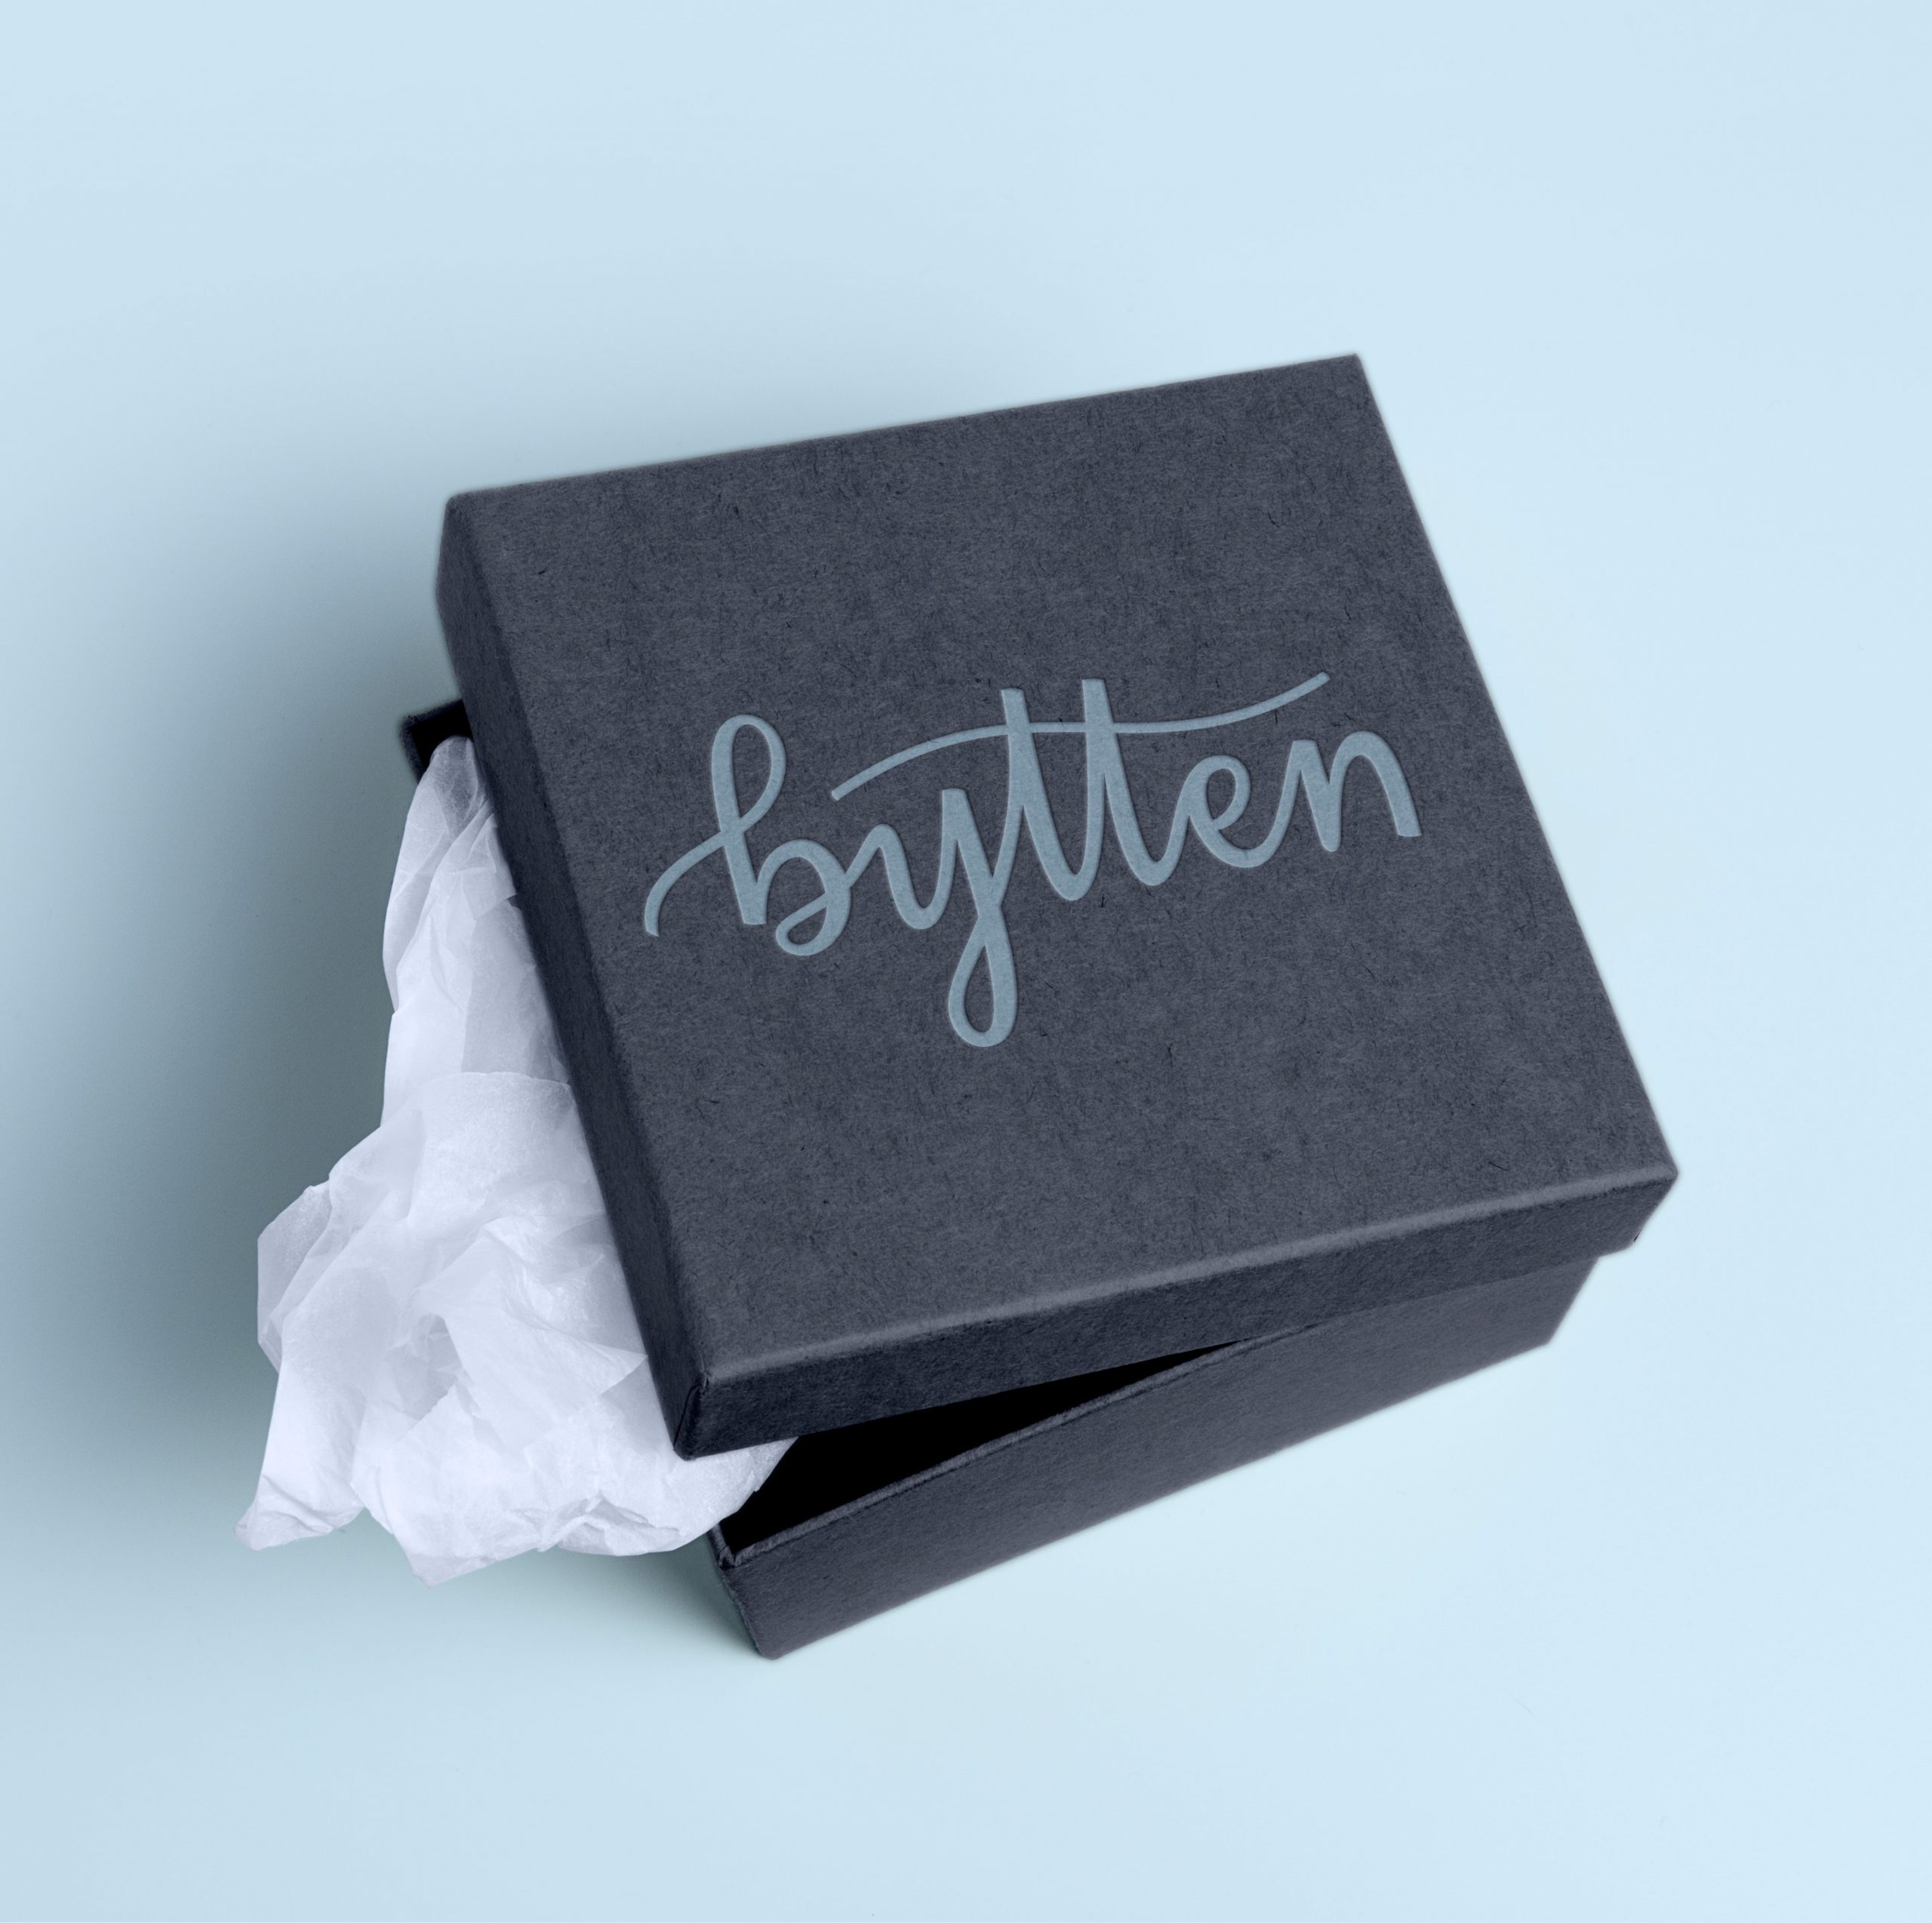 jewelry box with embossed bytten logo